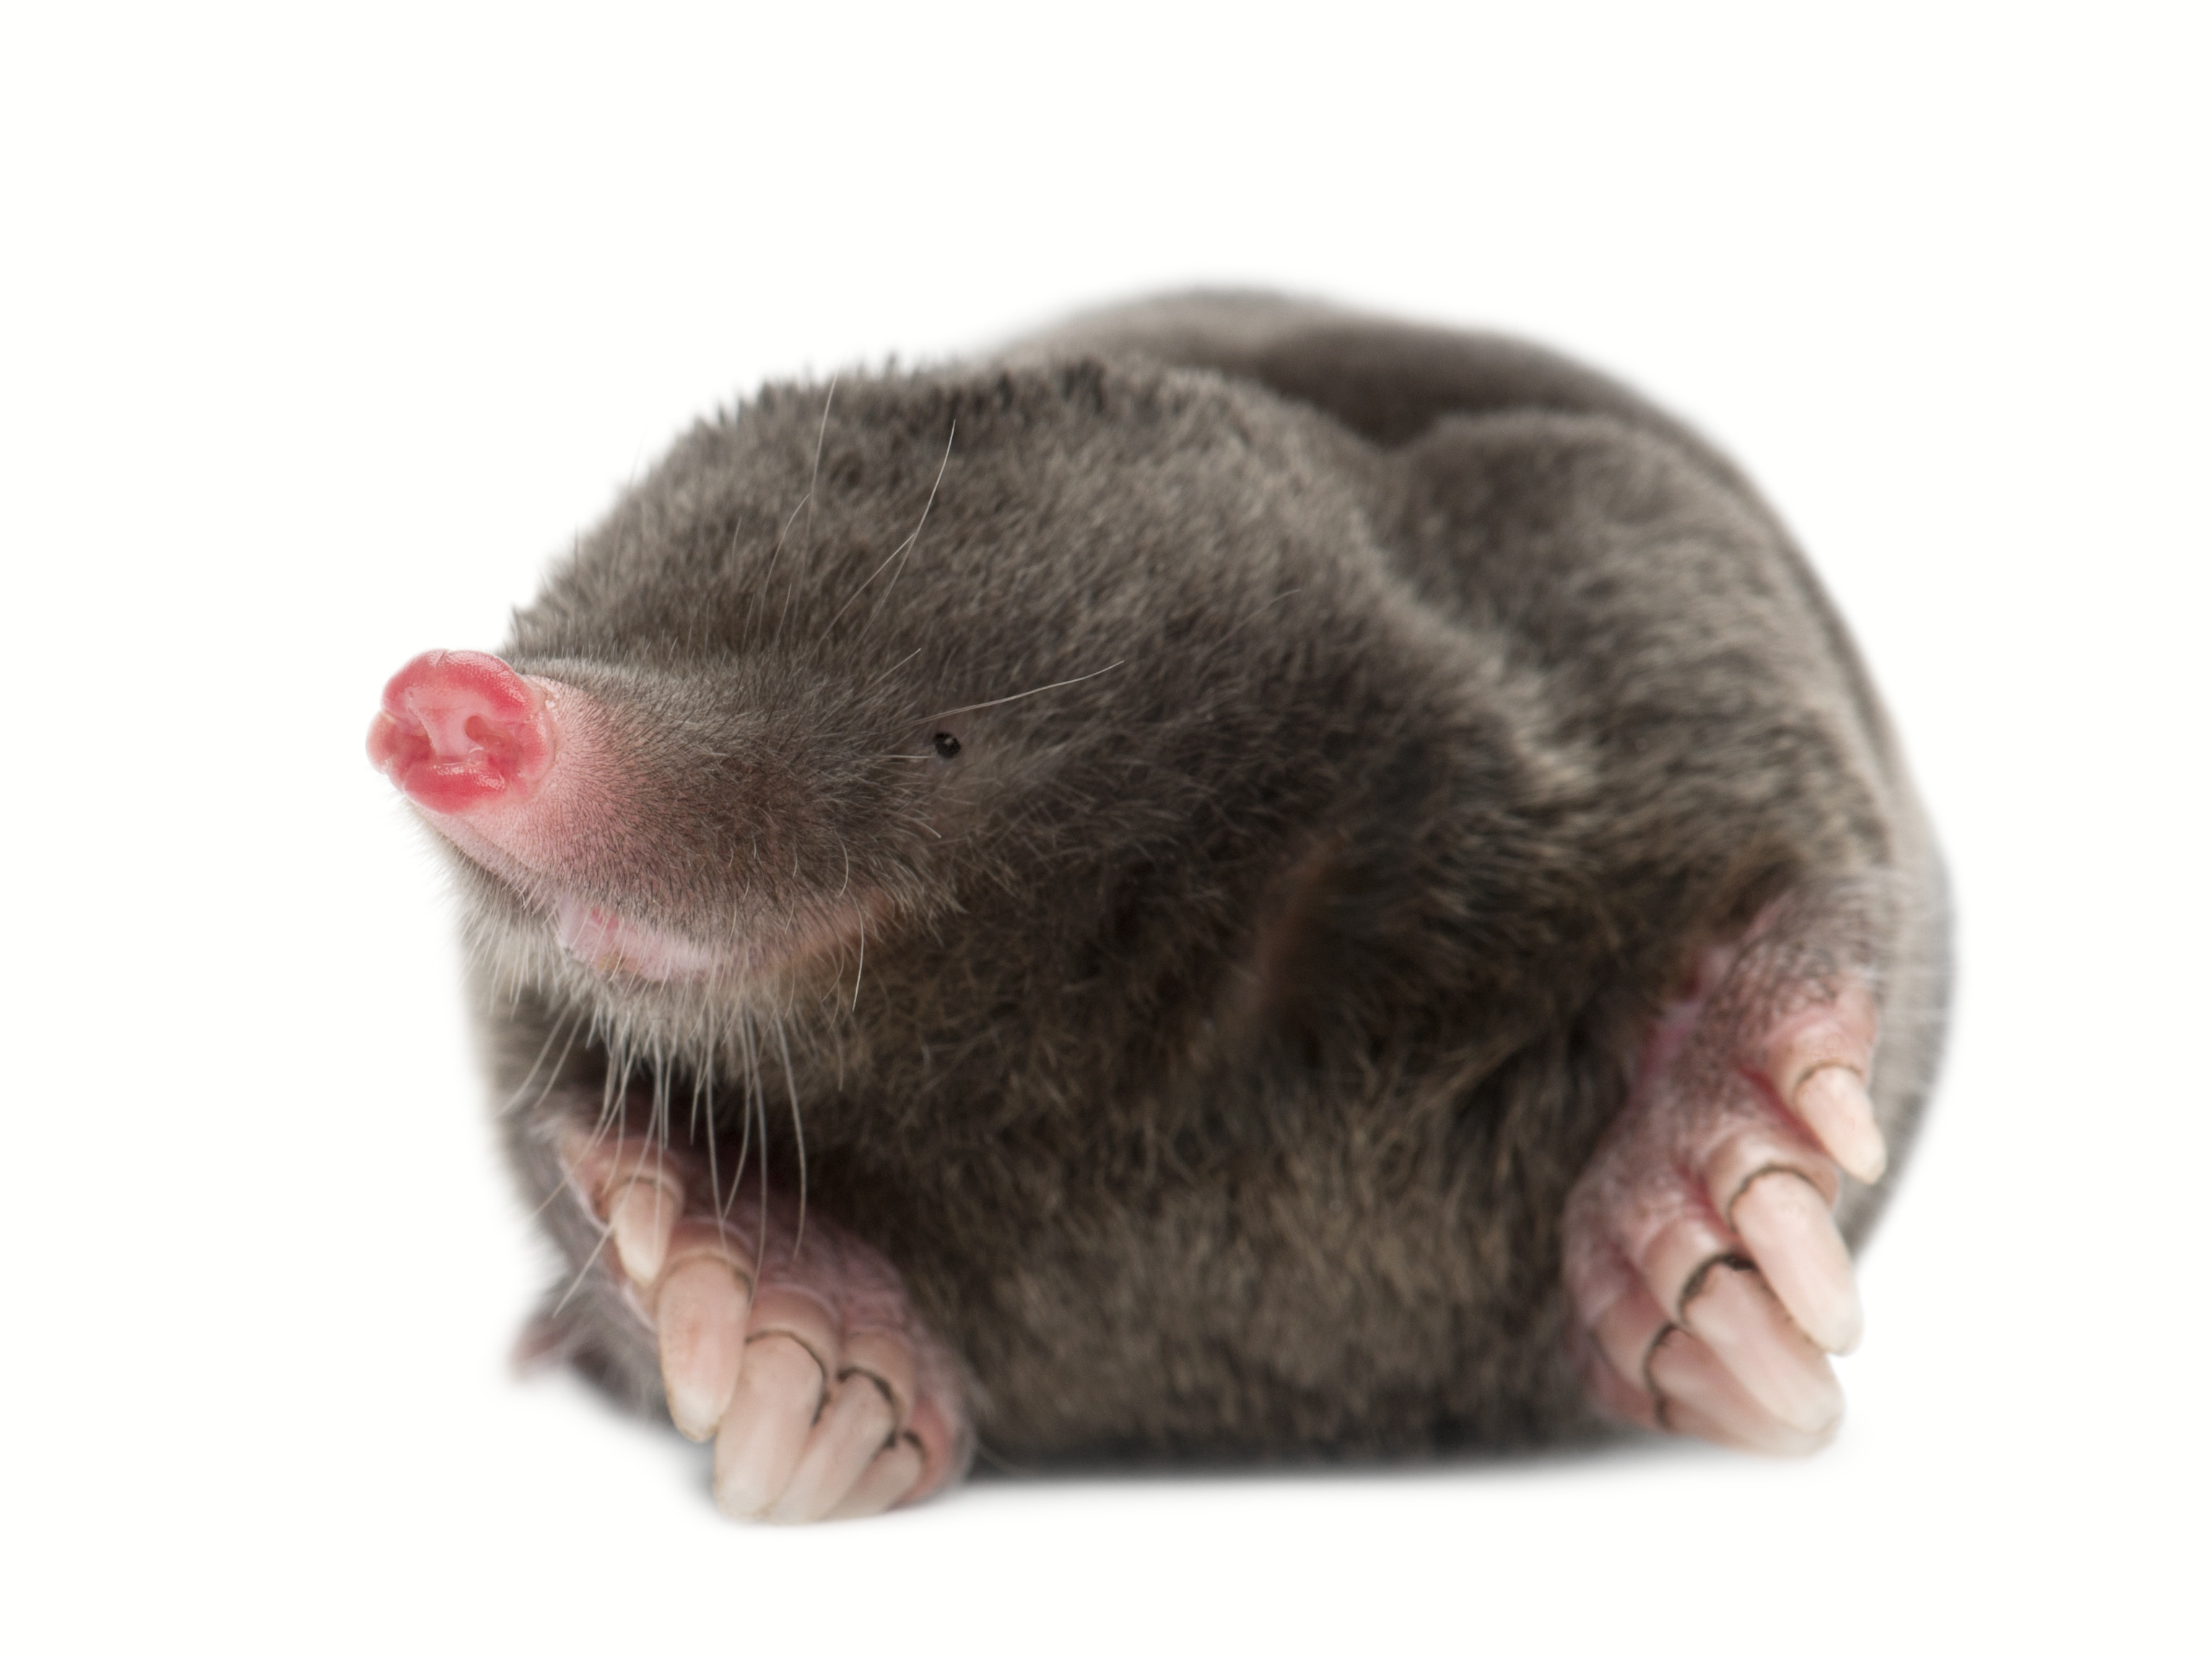 20 Things You Didn't Know About Moles | Discover Magazine